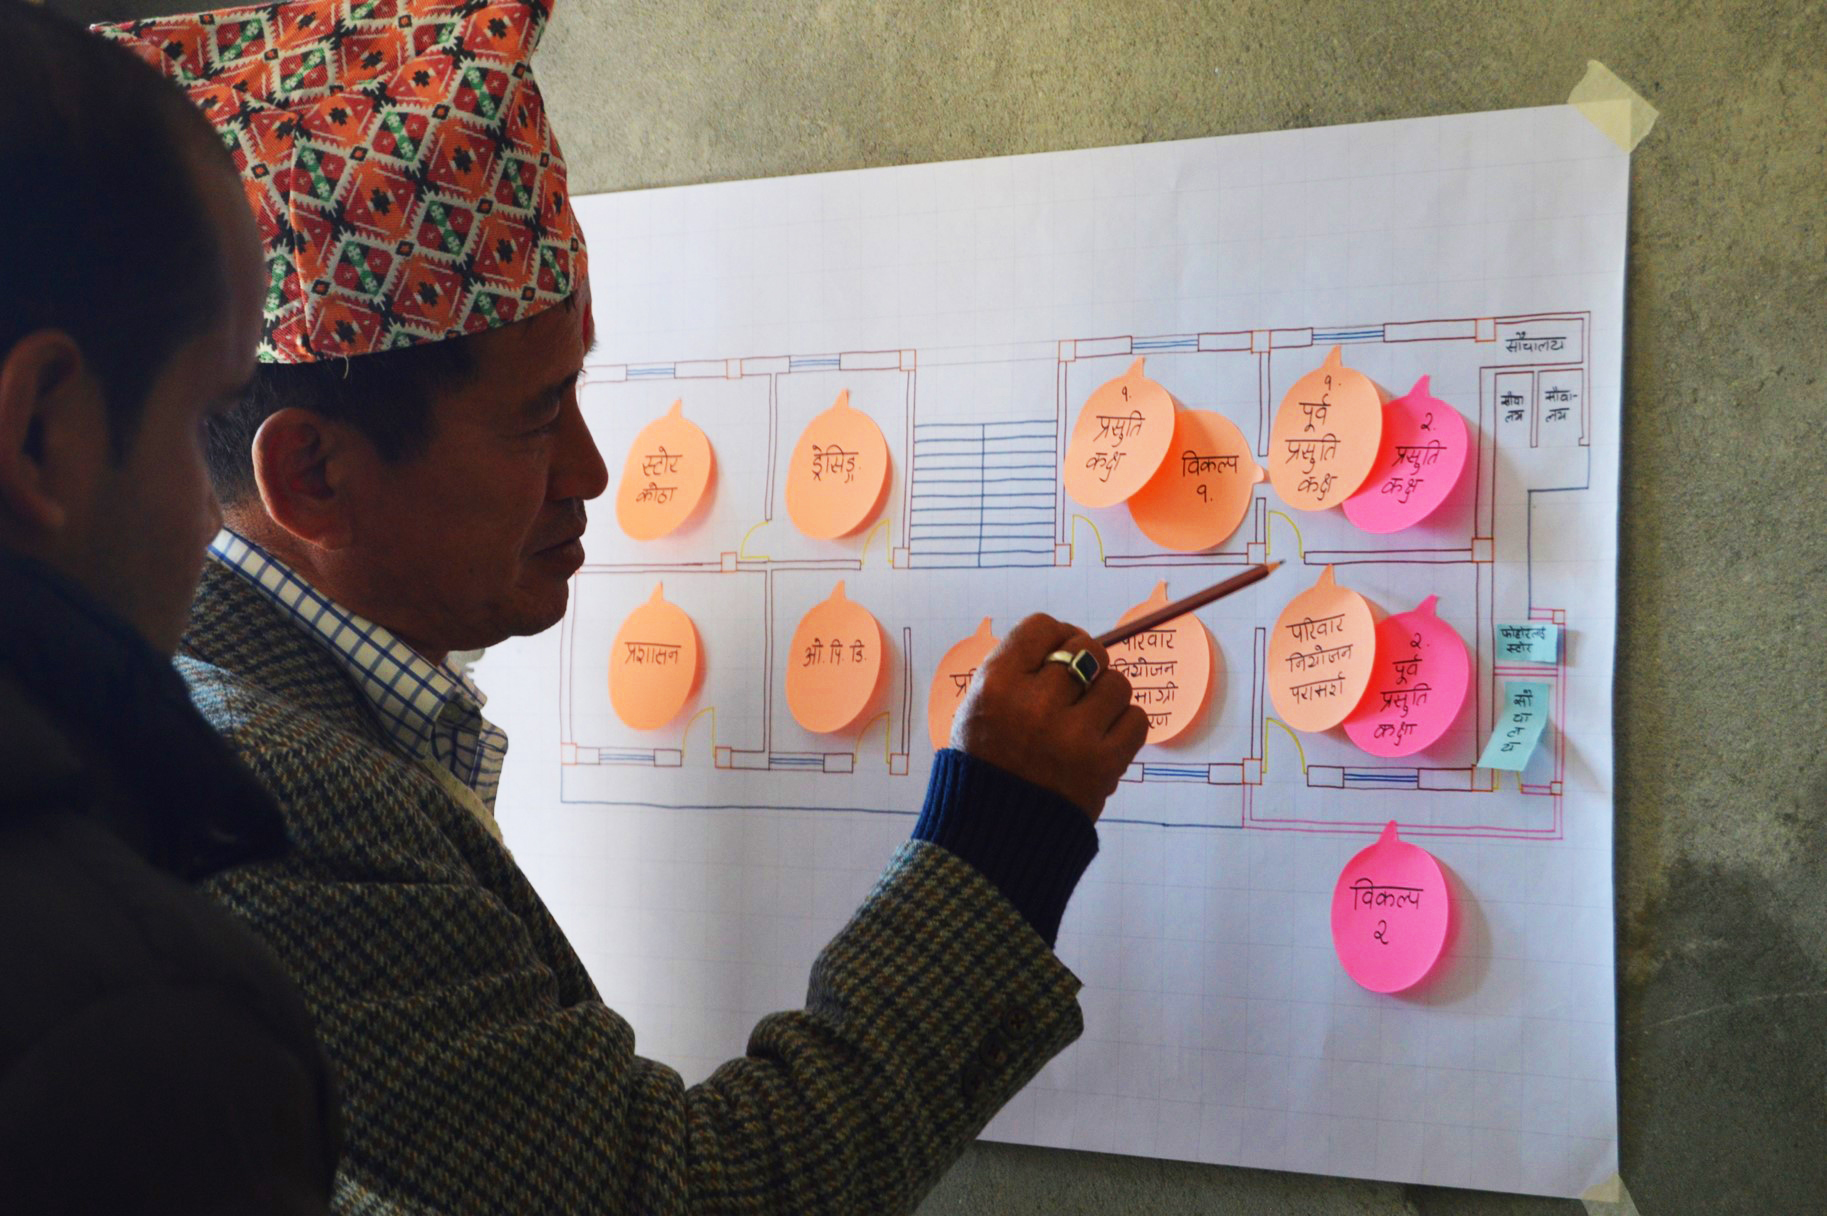 A community member in Nepal providing feedback on a project.